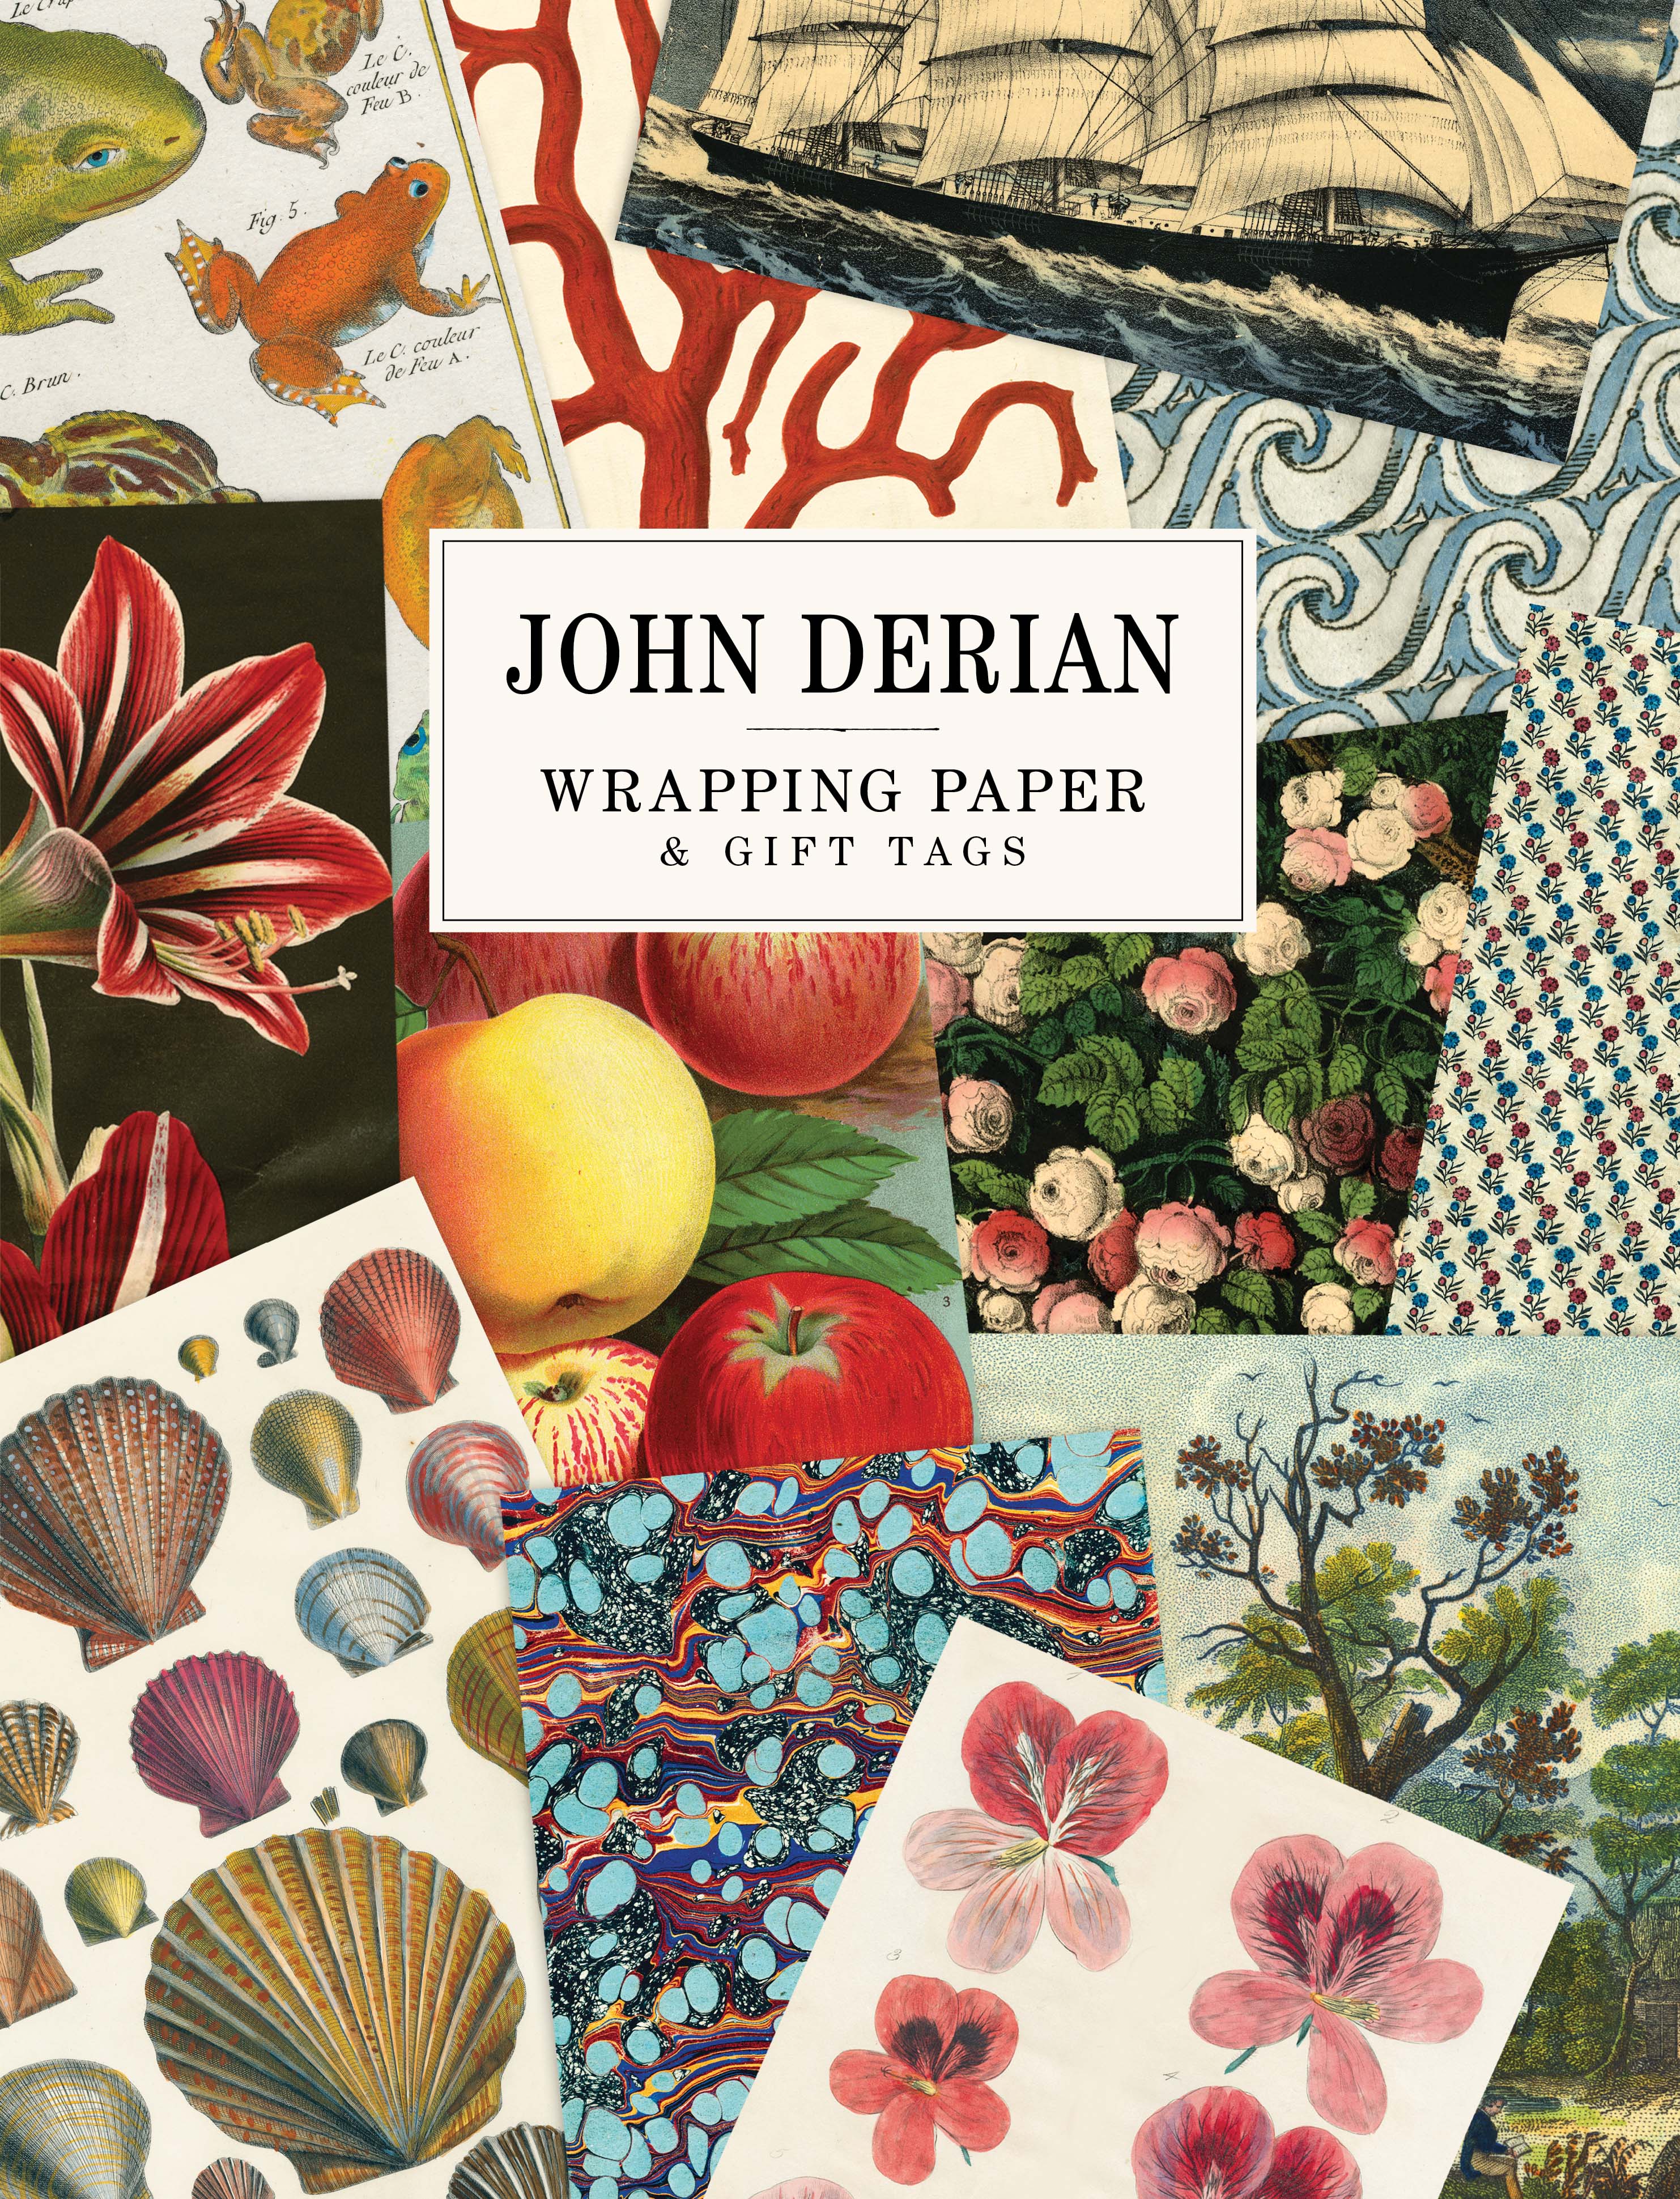 John Derian Paper Goods: Wrapping Paper & Gift Tags by John Derian